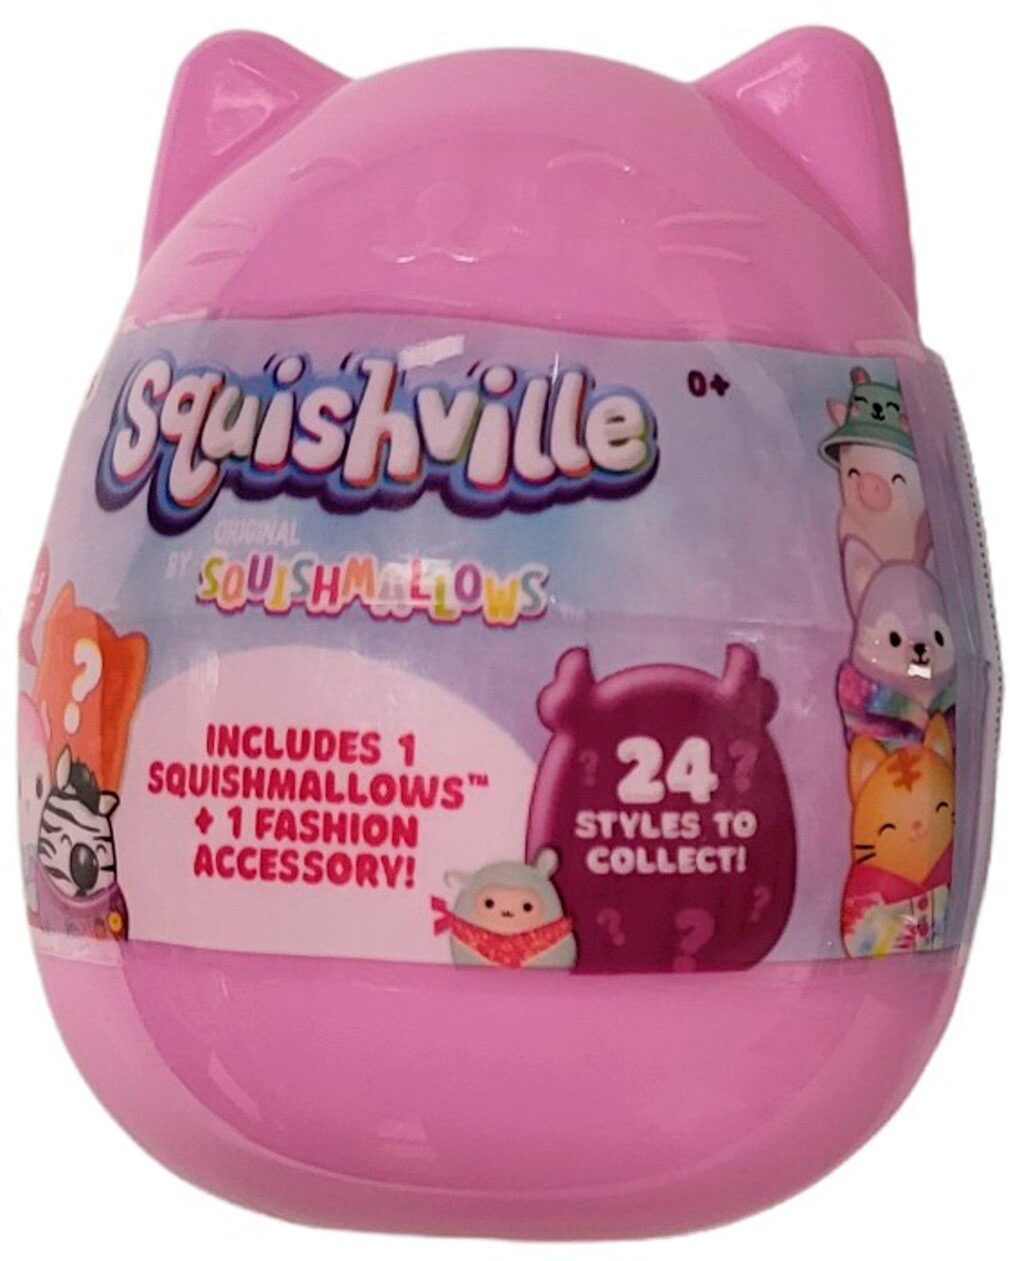 Jazwares - Squishville by Squishmallows Series 3 - BLIND PACK (1 Mini  Squishmallow & Accessory):  - Toys, Plush, Trading Cards,  Action Figures & Games online retail store shop sale